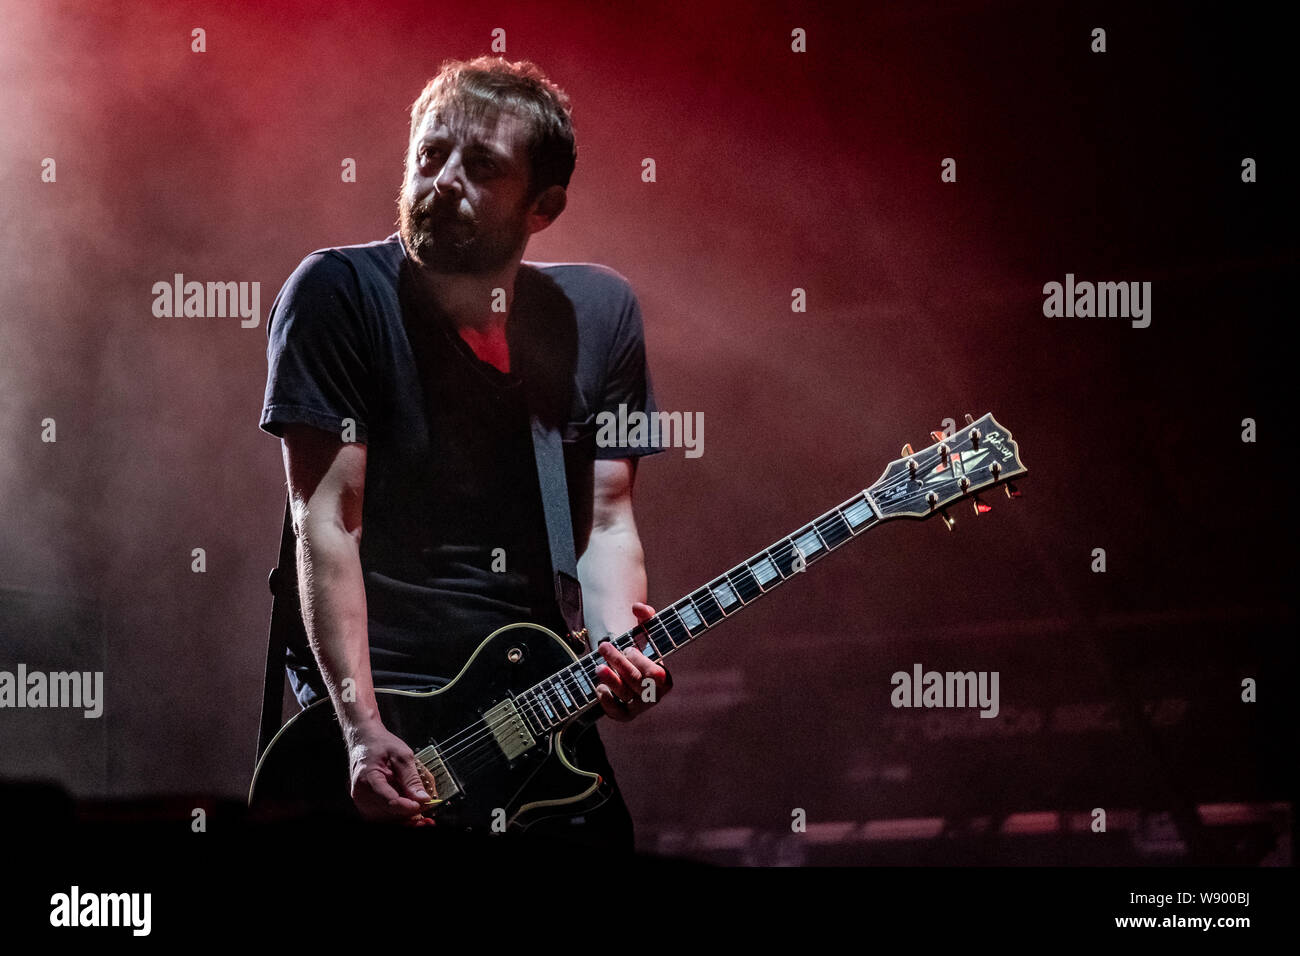 Skanderborg, Denmark. 10th, August 2019. The English rock band Suede  performs a live concert during the Danish music festival SmukFest 2019 in  Skanderborg. Here guitarist Richard Oakes is seen live on stage. (